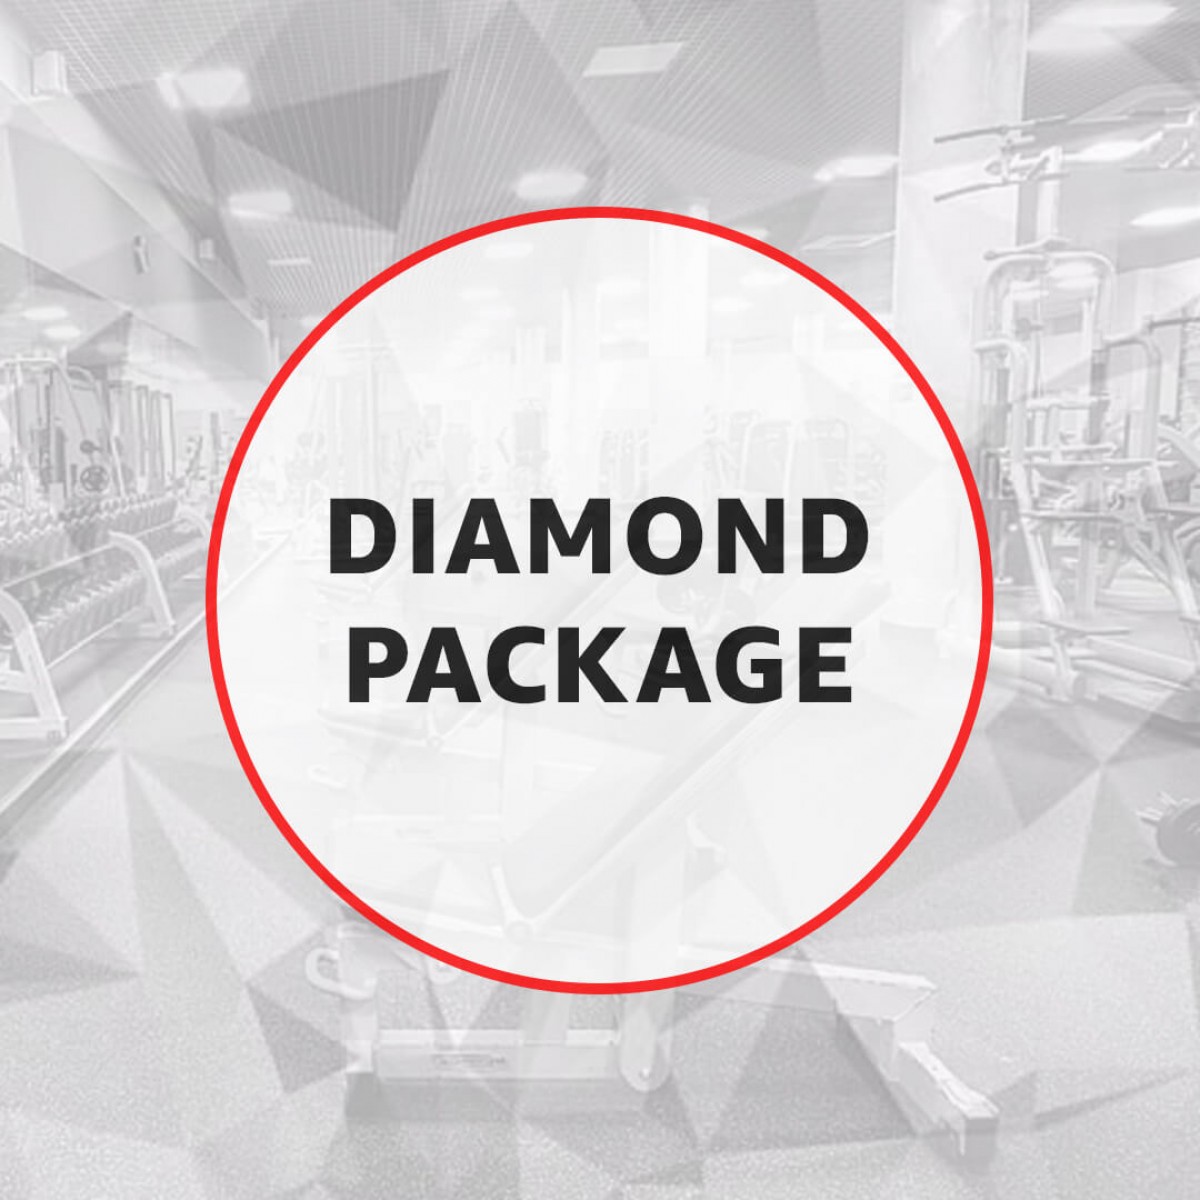 Corporate Office Gym - Diamond Package